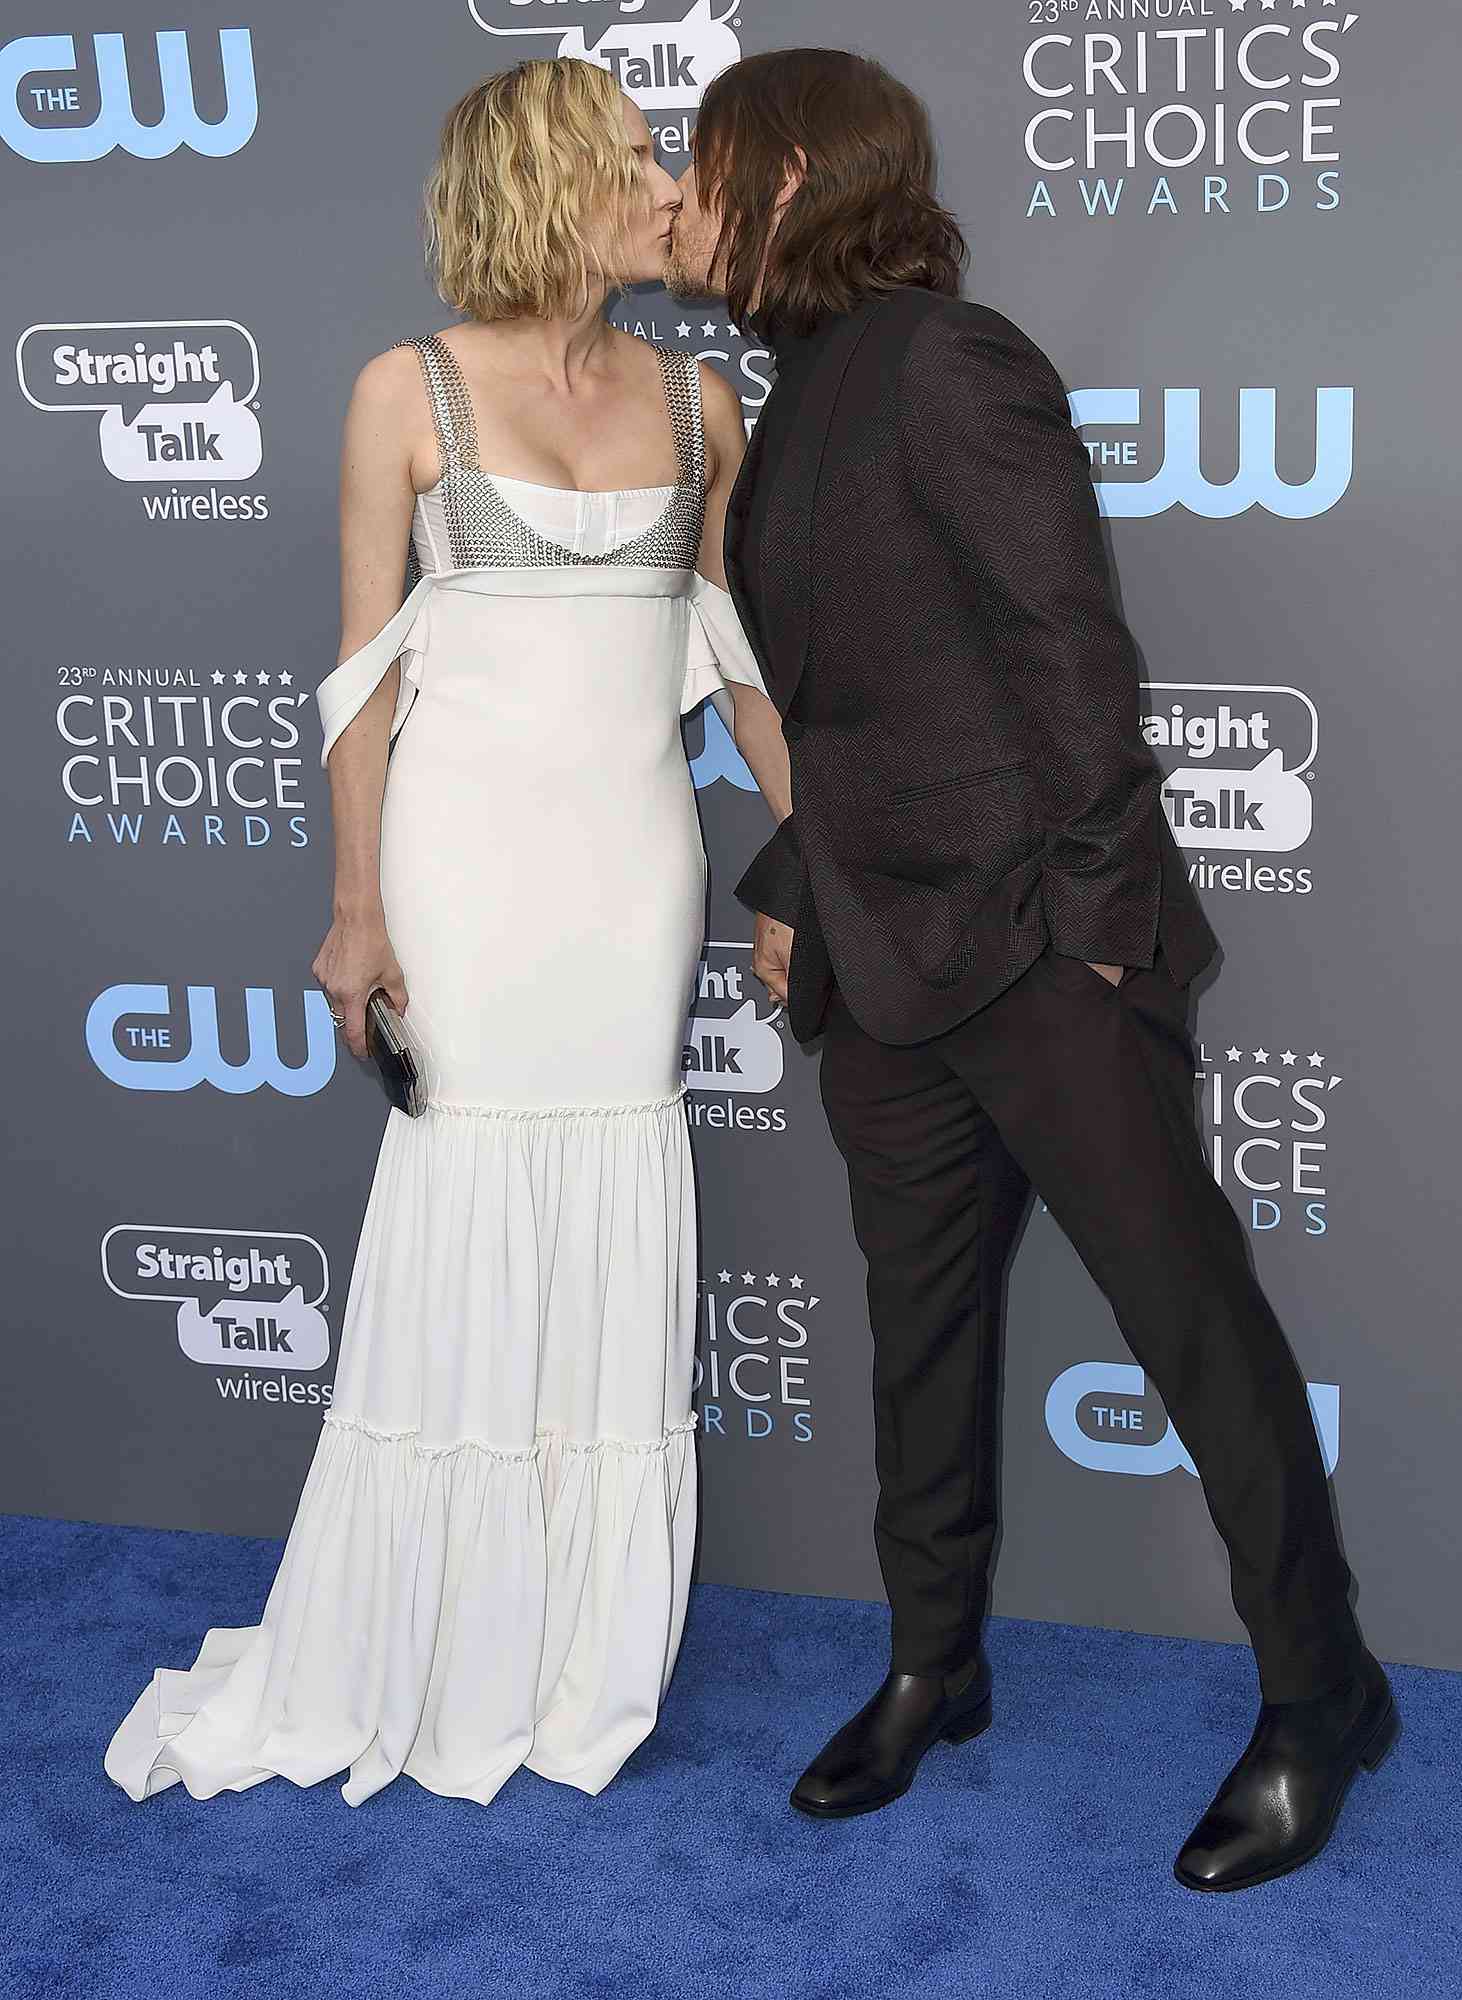 Married and norman kinney reedus emily Norman Reedus,